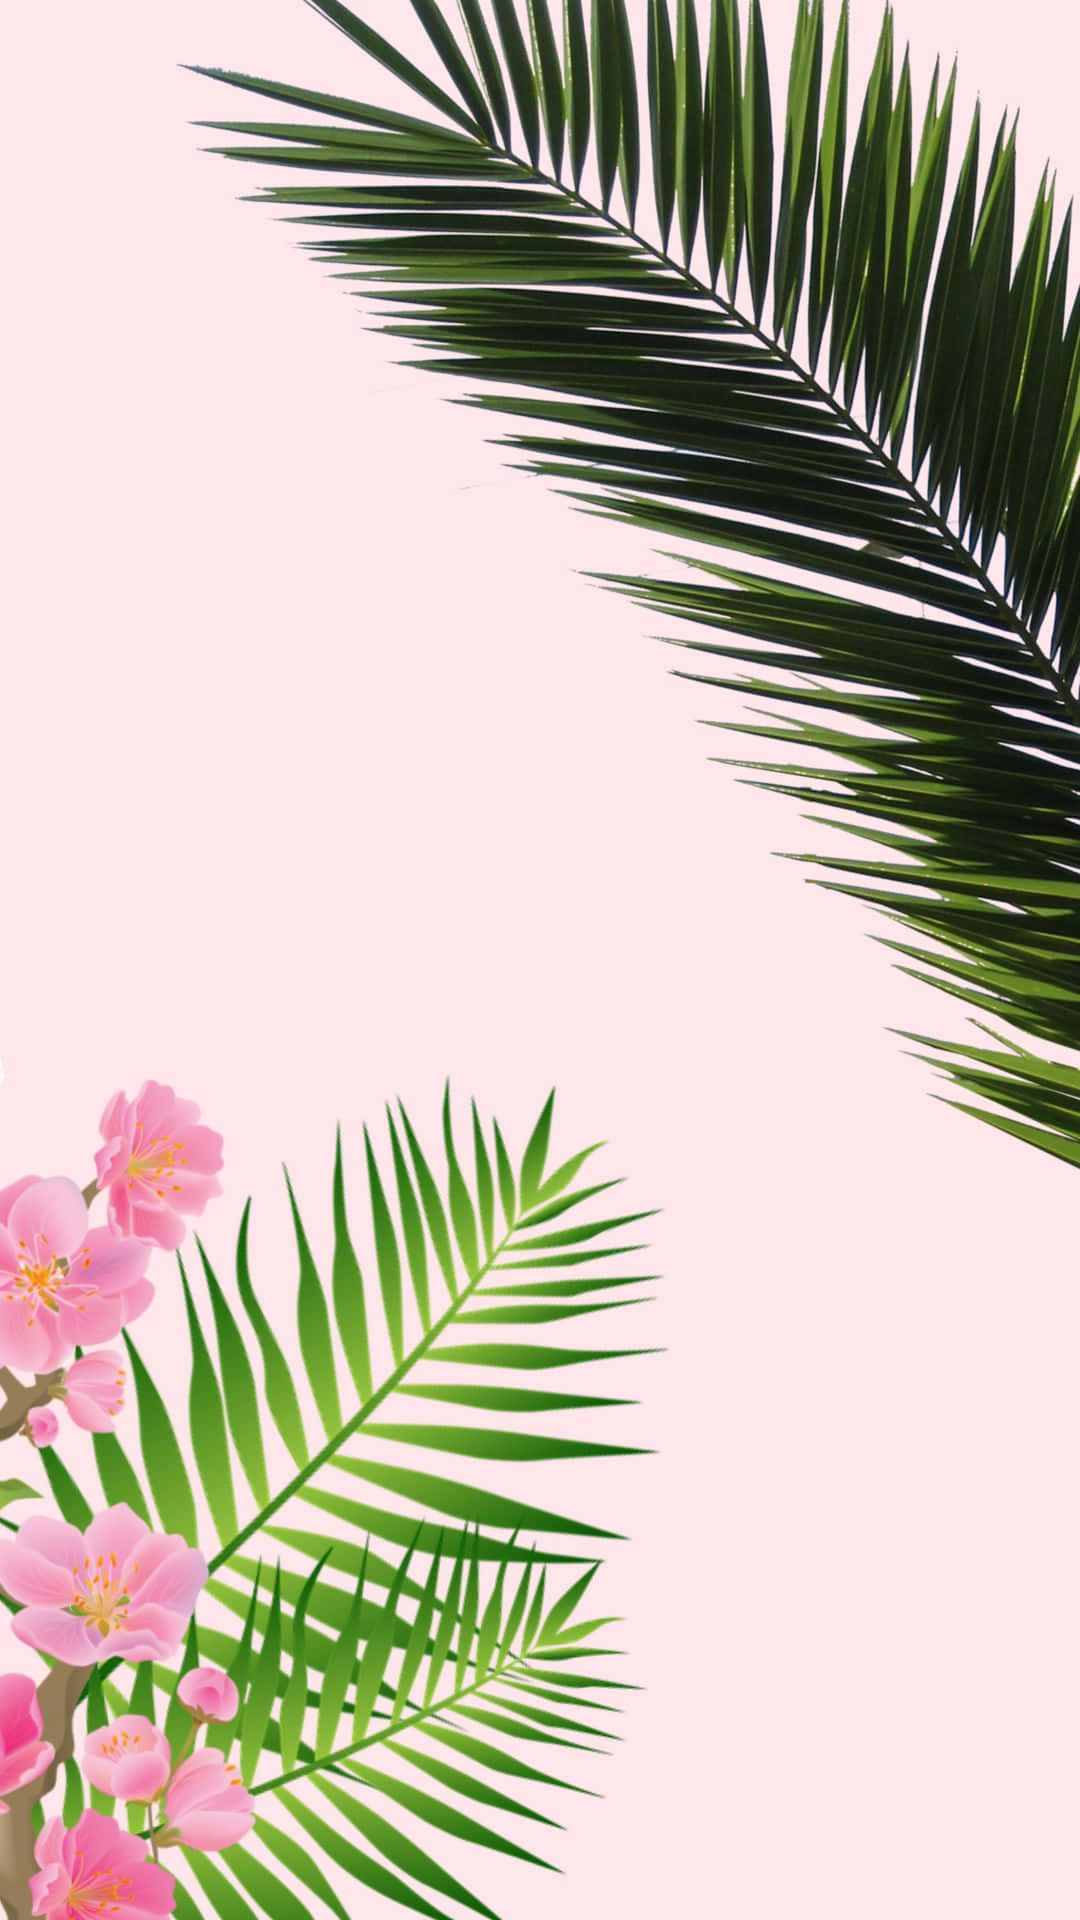 Enjoy a relaxing moment by the beach and get inspired by the tropical aesthetic. Wallpaper